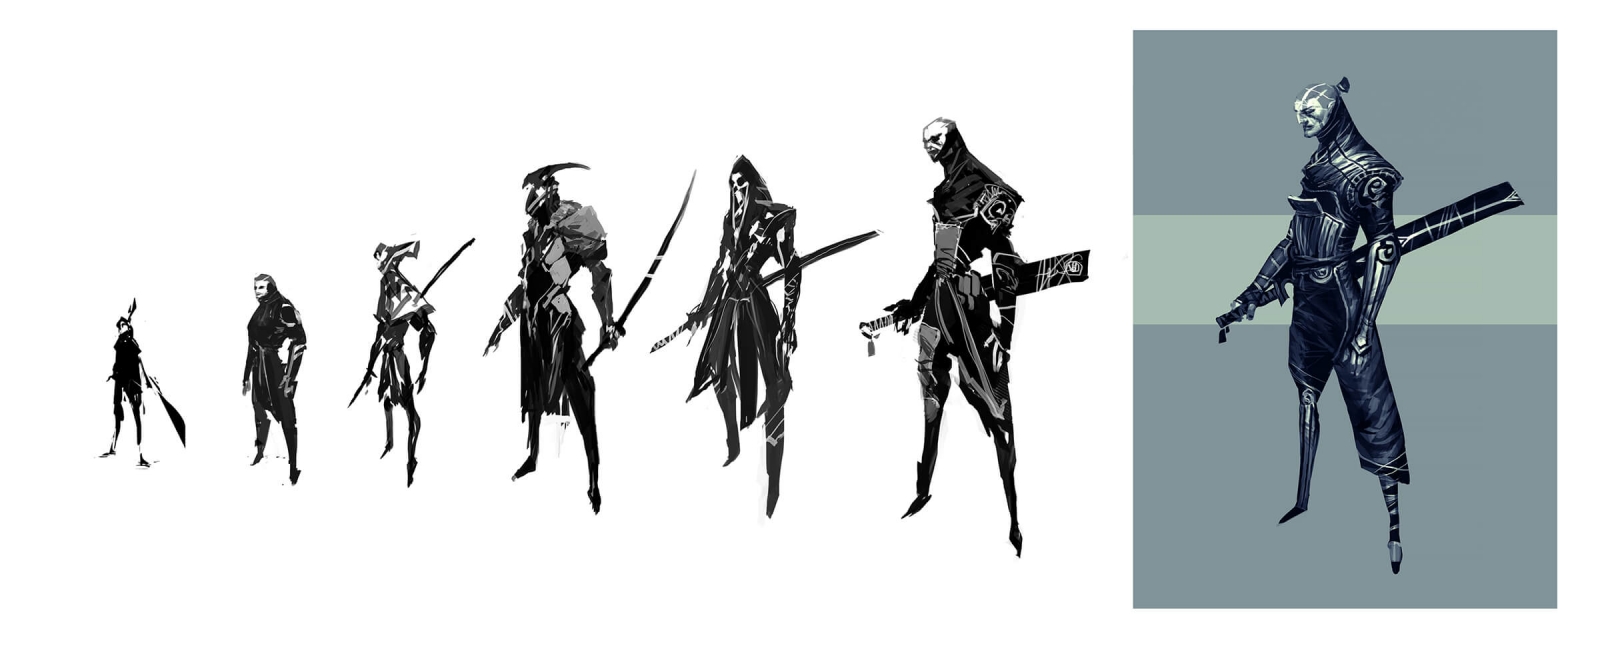 Black-and-white development art of warriors standing in ornate battlegear looking from the side.